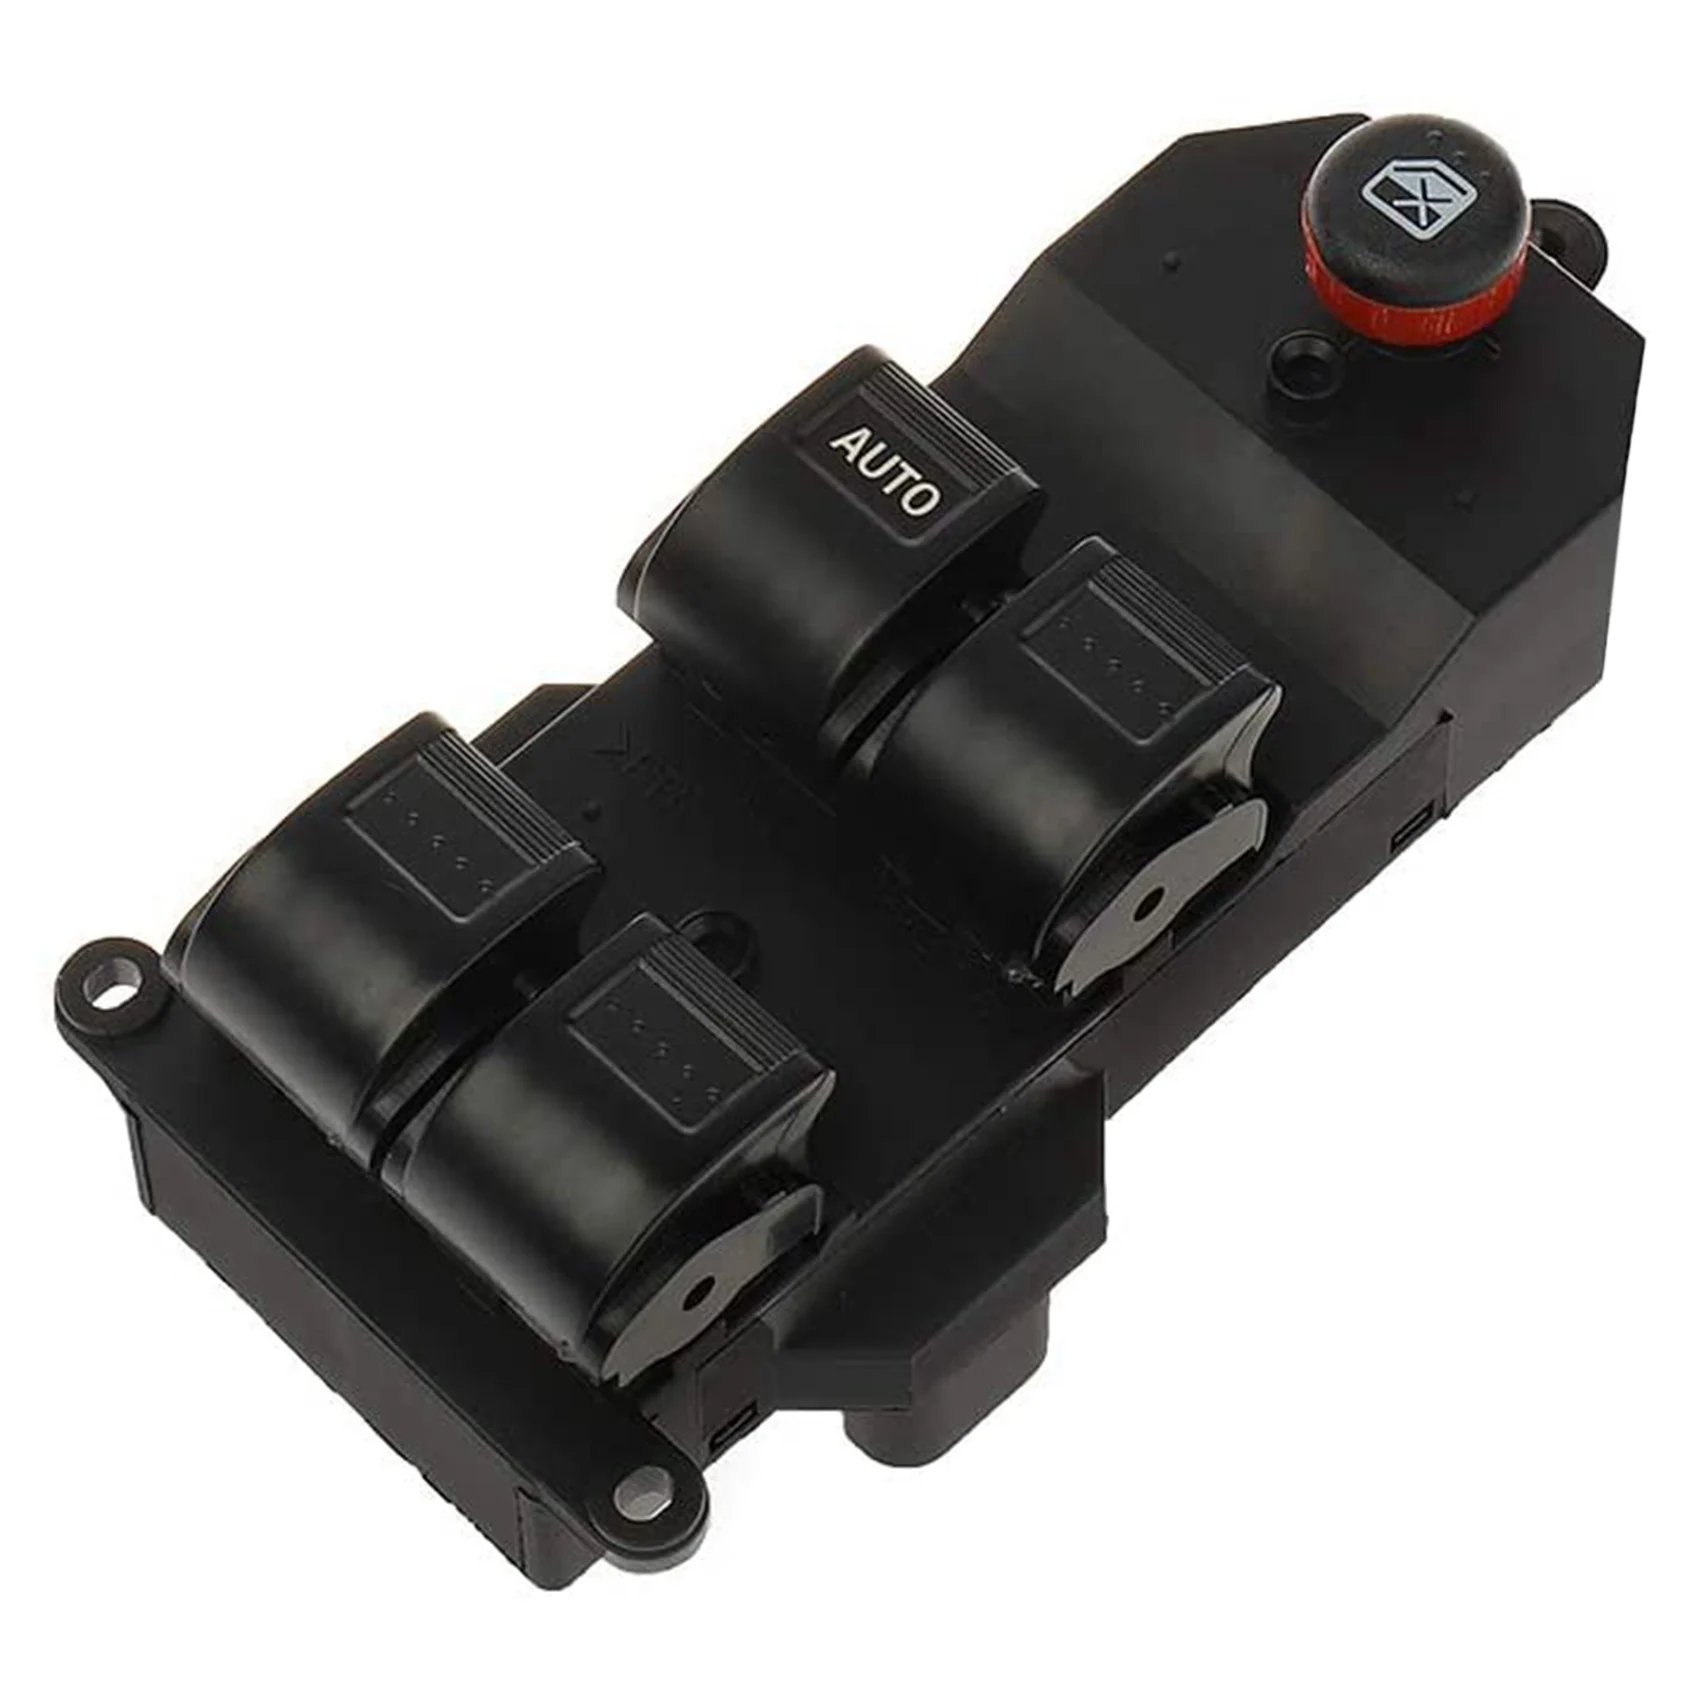 

Window Lifter Switch 35750-S5A-A02-ZA Suitable for 01-05 Honda Civic Glass Lifter Switch Electric Window Switch